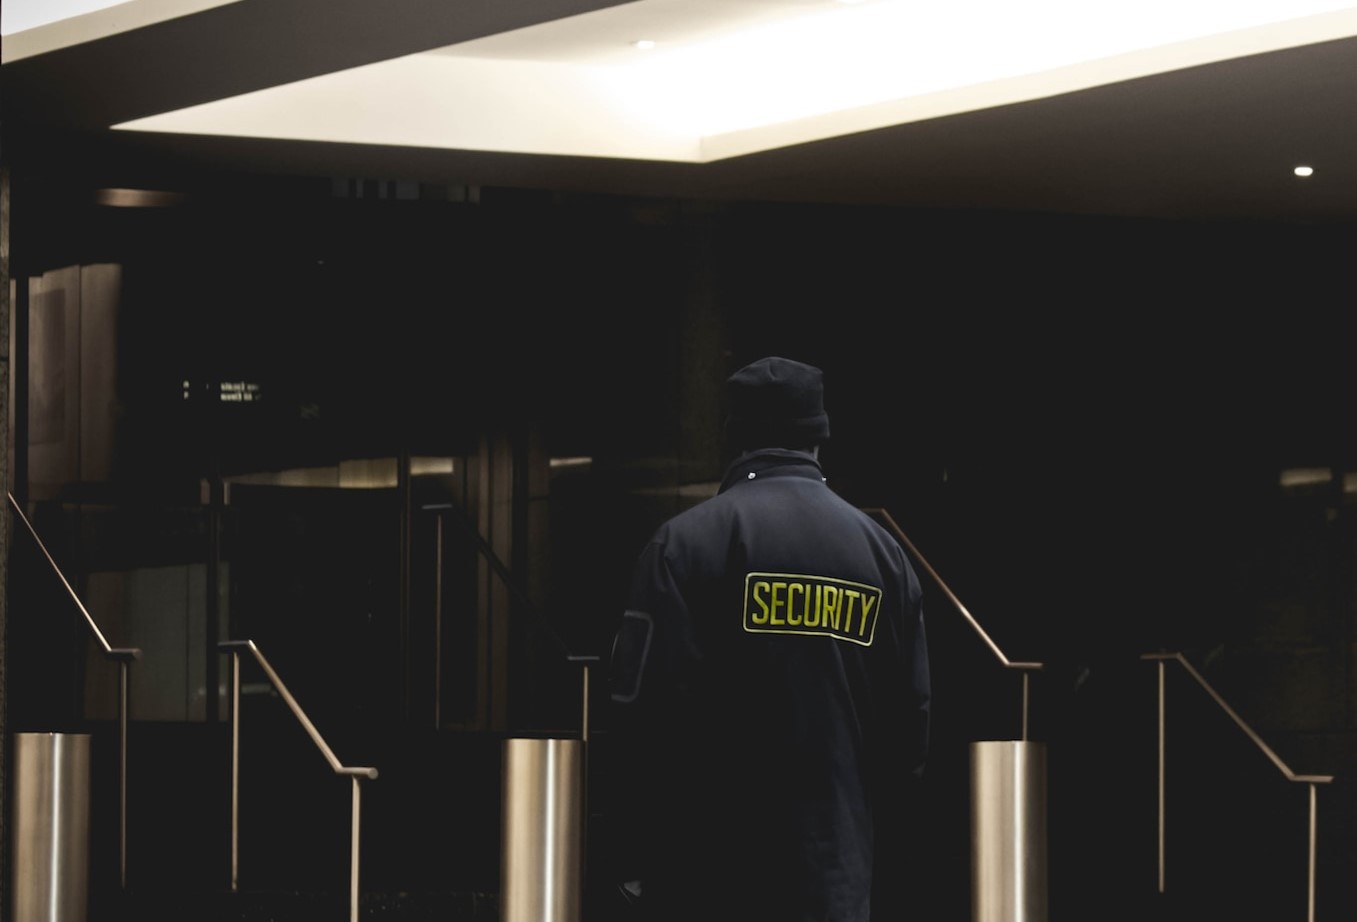 A security guard on patrol